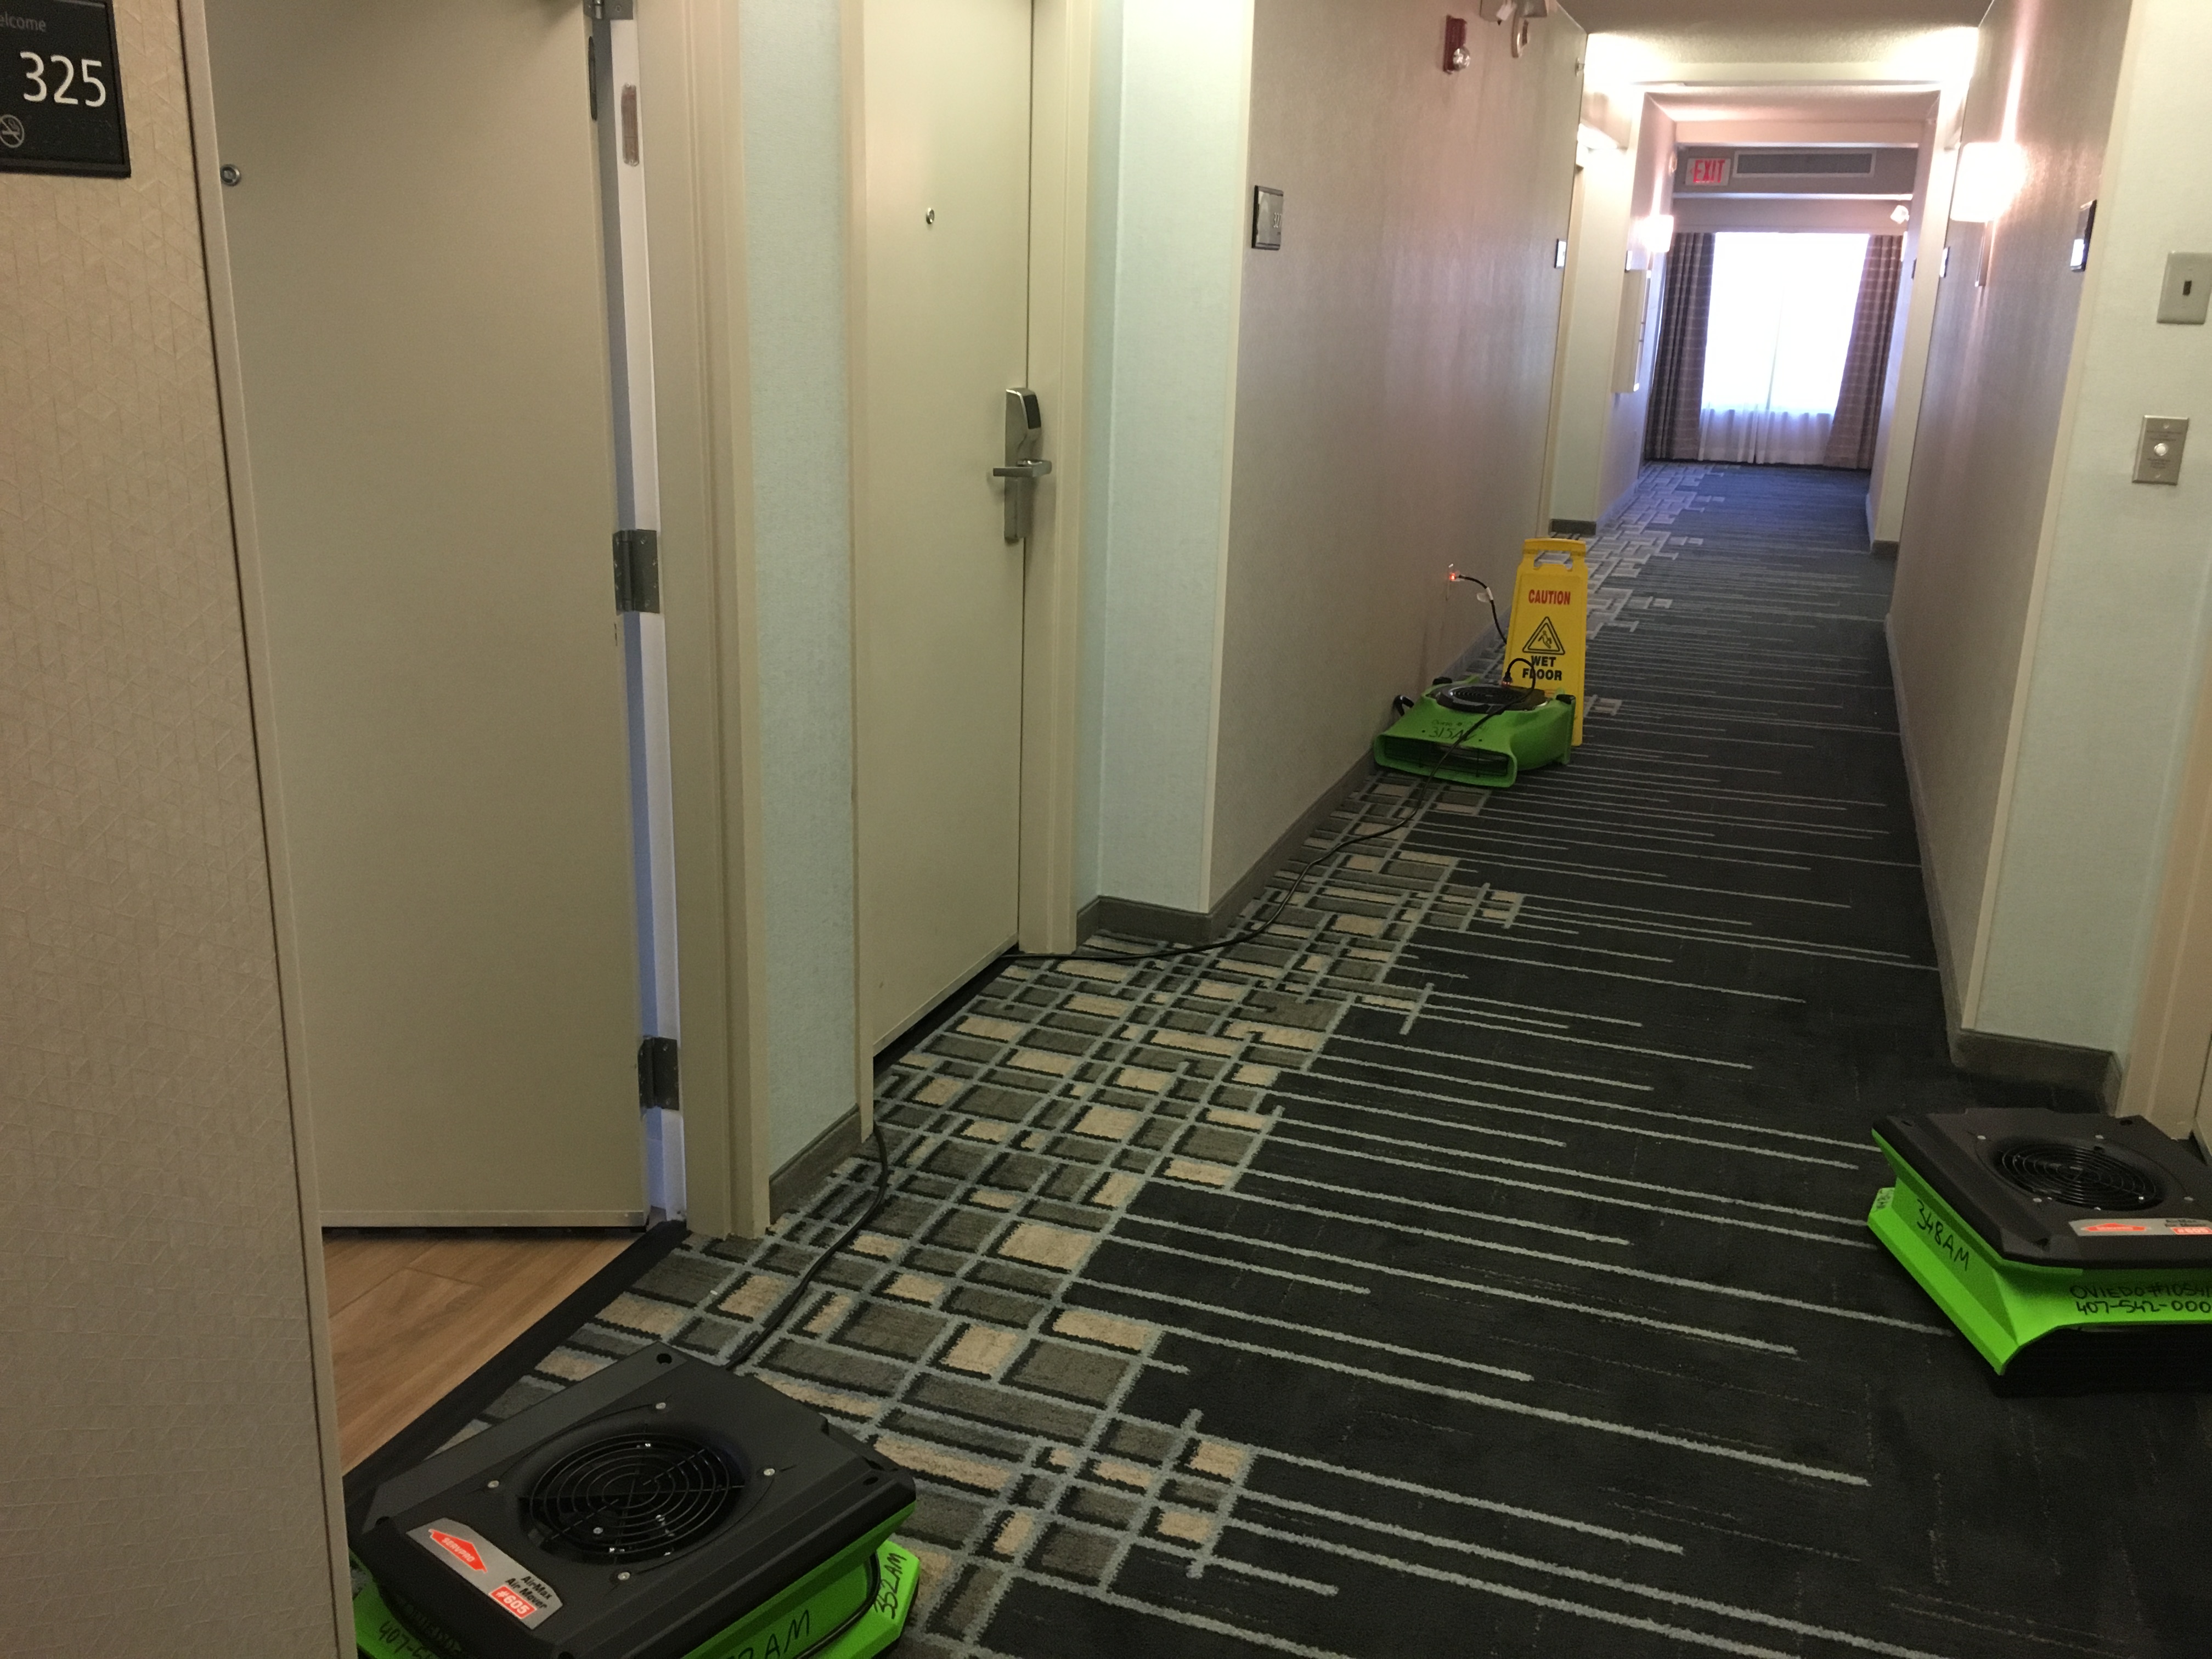 Commercial water damage. SERVPRO is here to help.